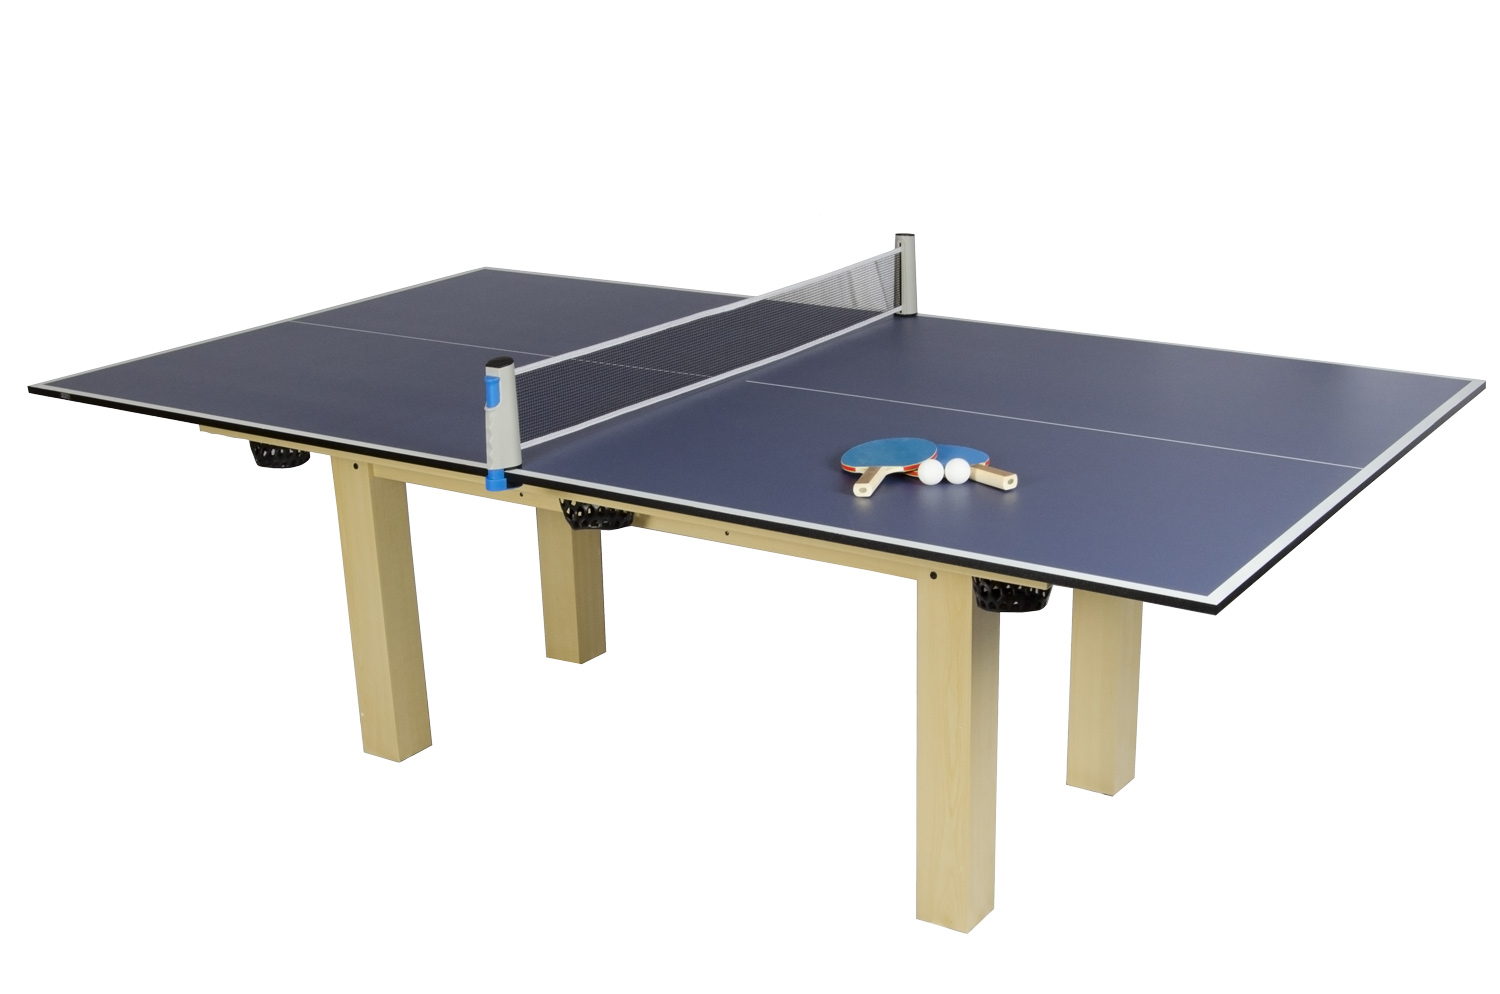 table tennis table uk